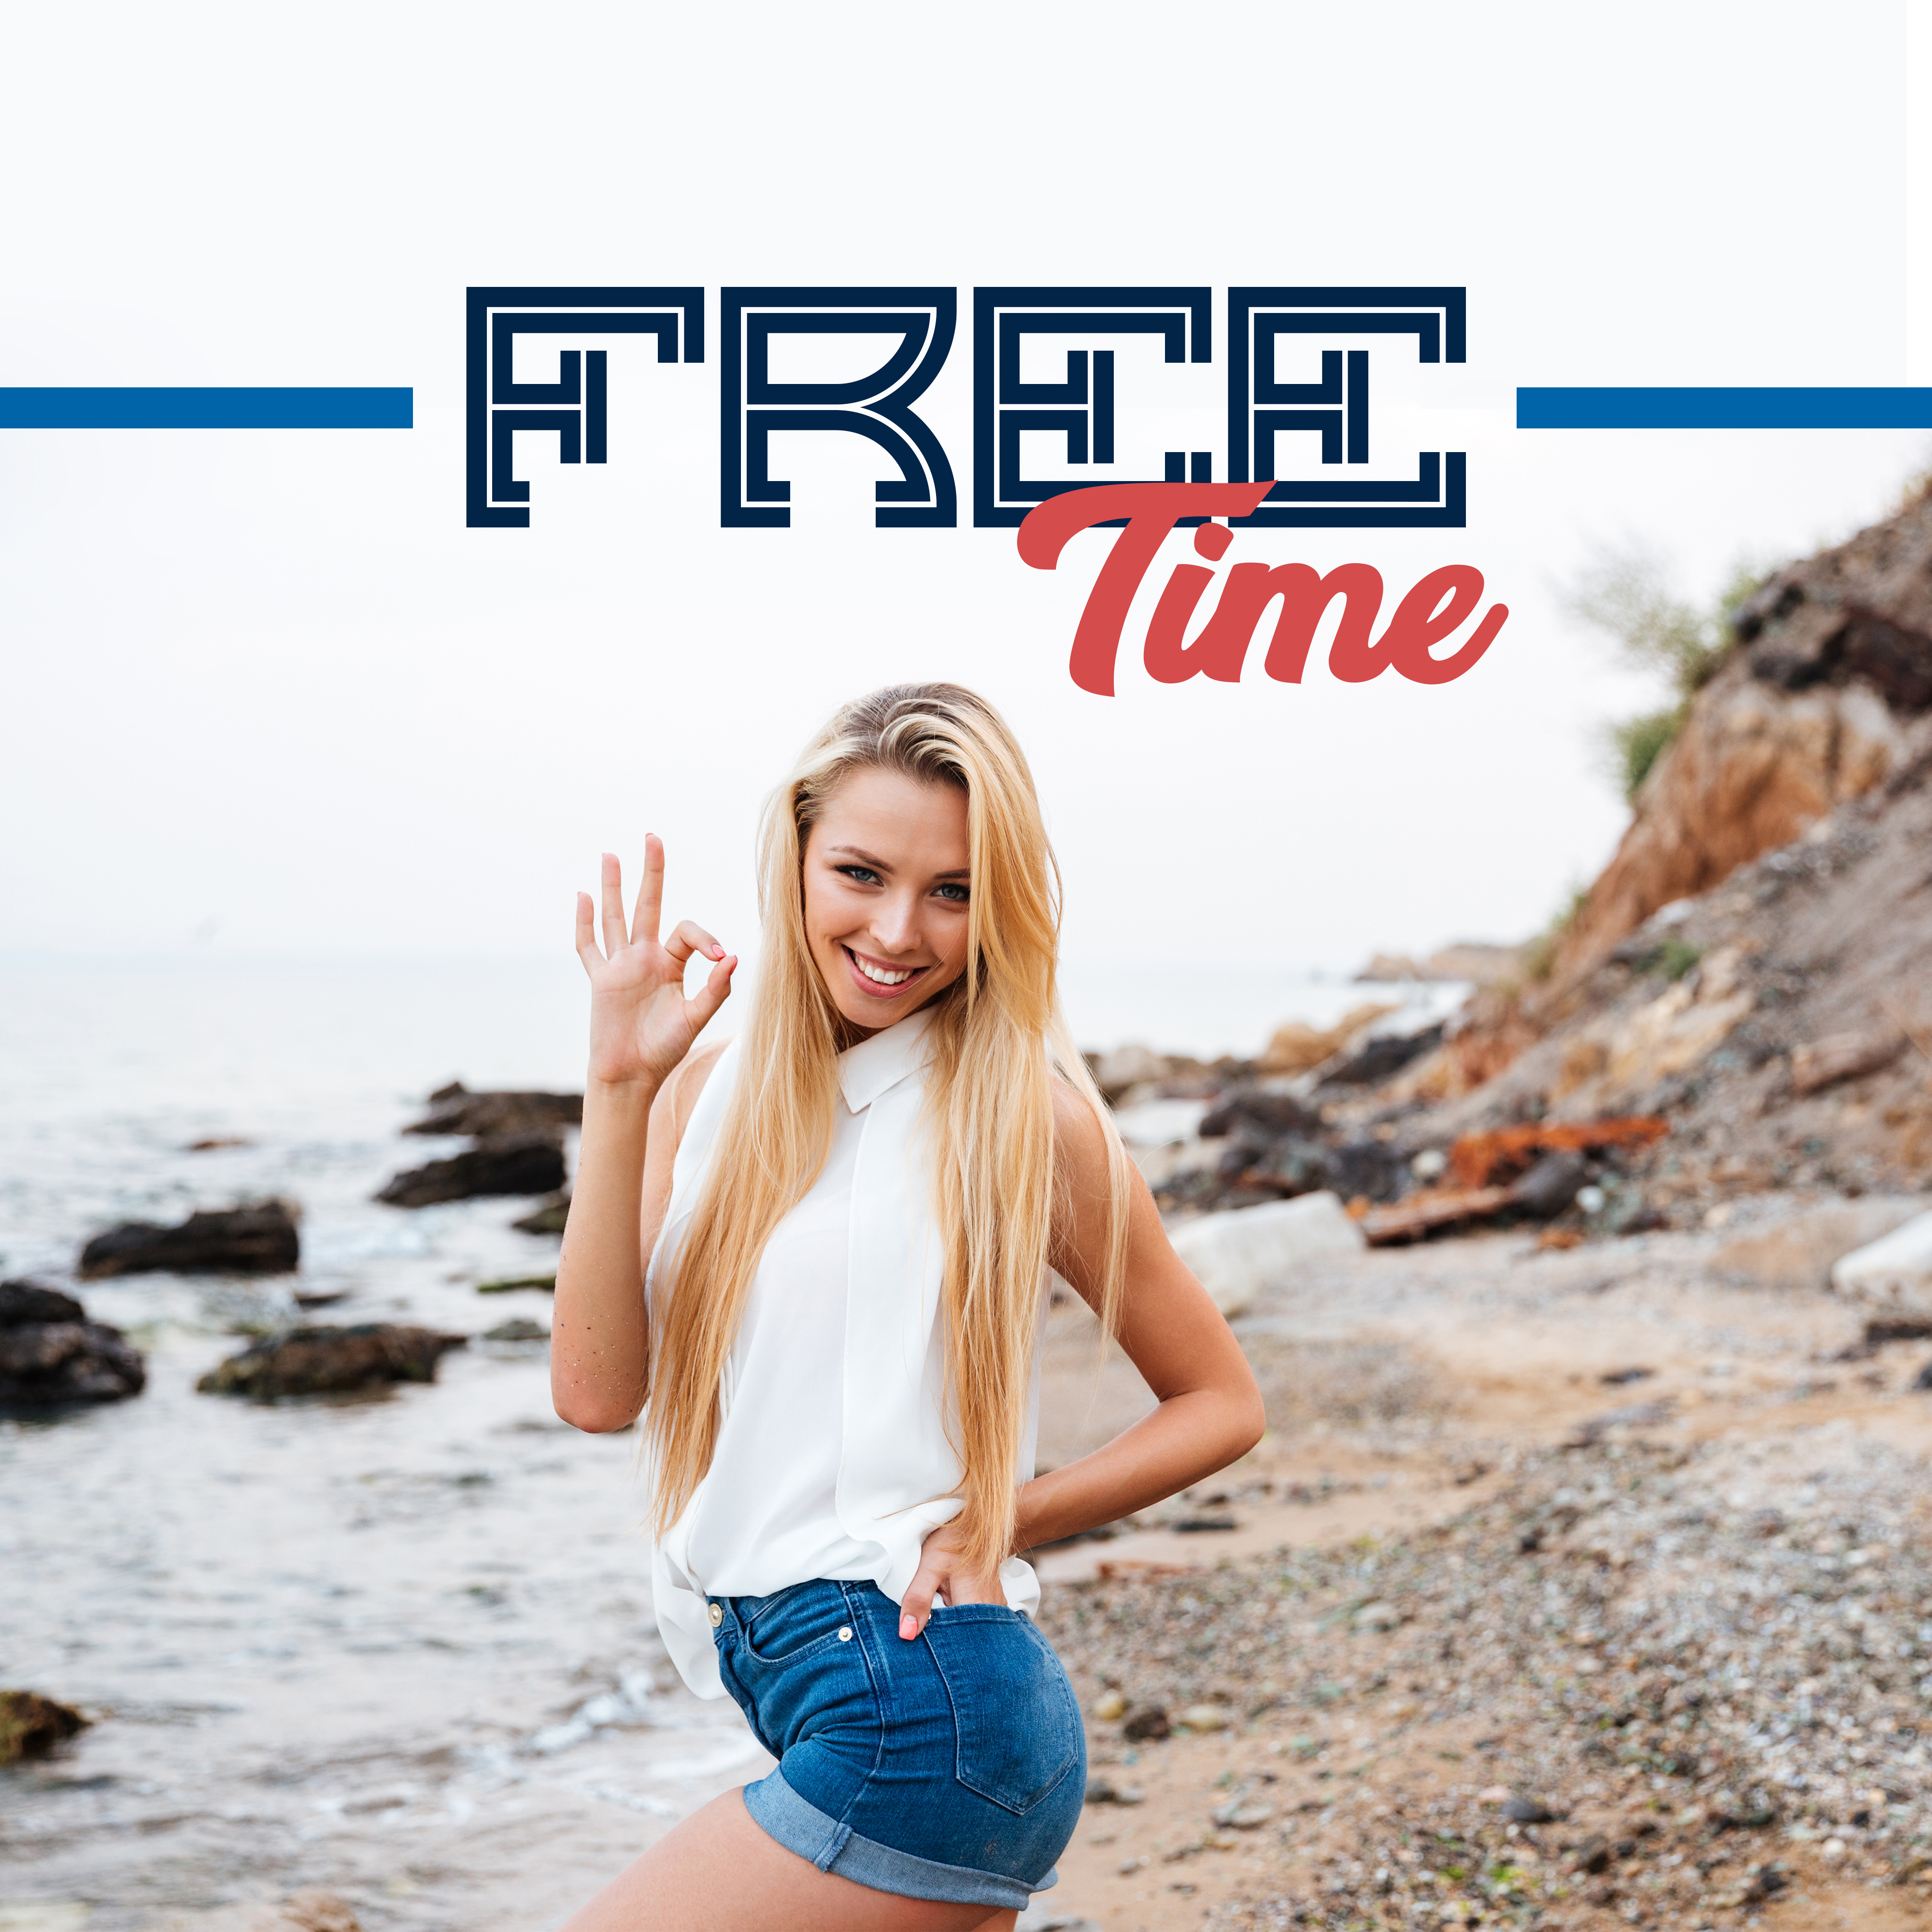 Free Time  Best Holiday, Beach Chill Out, Relax, Time to Party, Summer Beats